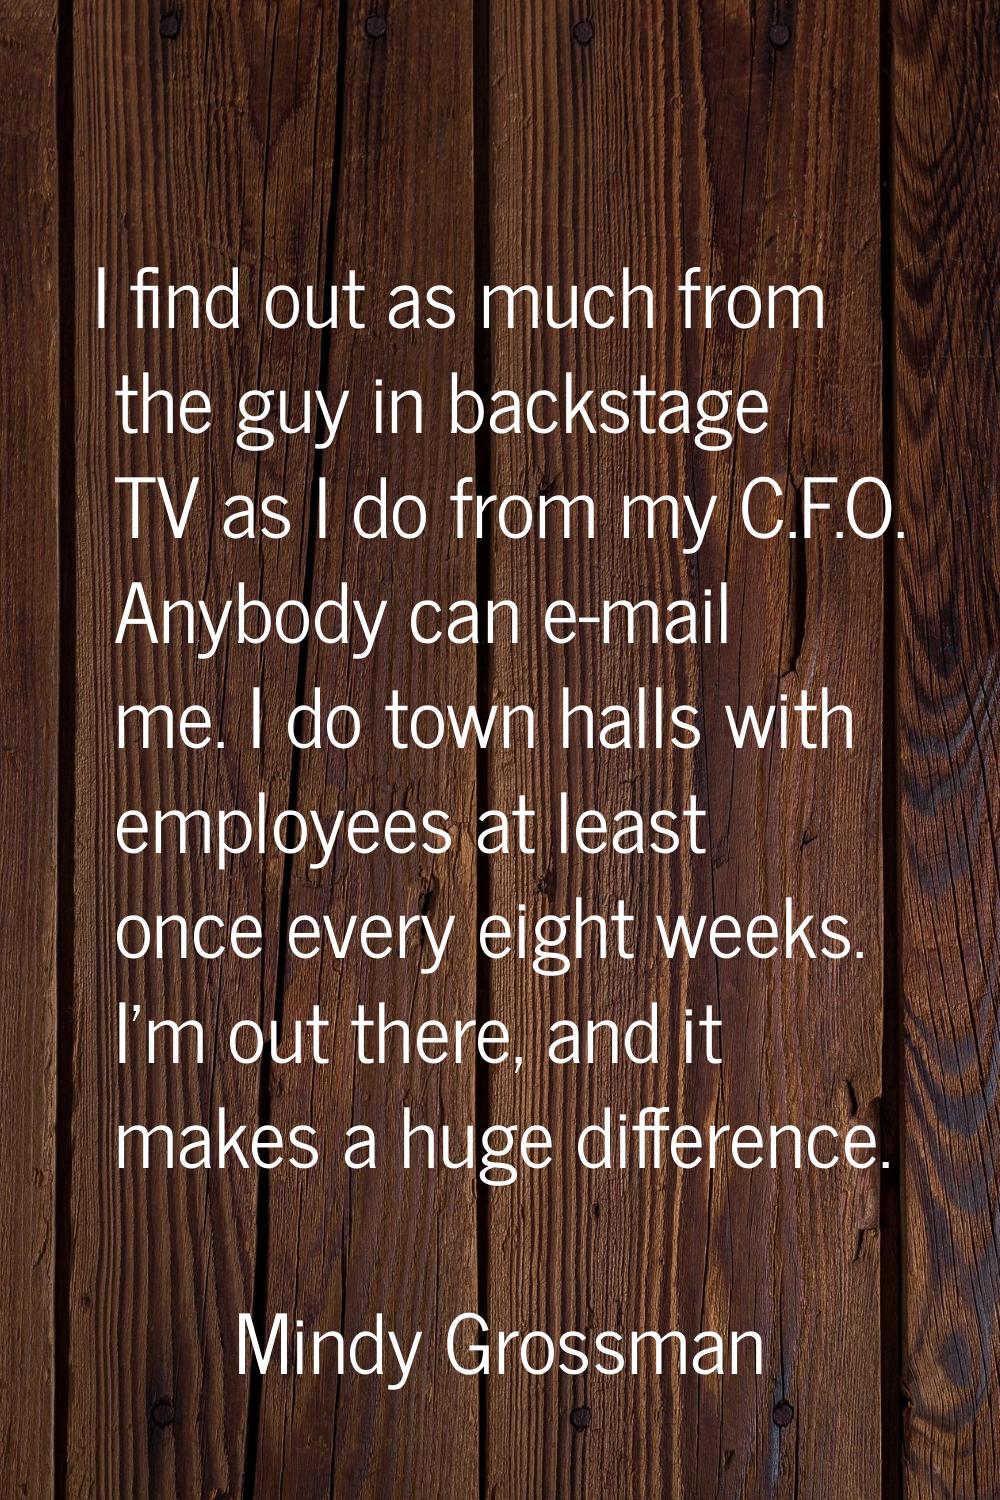 I find out as much from the guy in backstage TV as I do from my C.F.O. Anybody can e-mail me. I do 